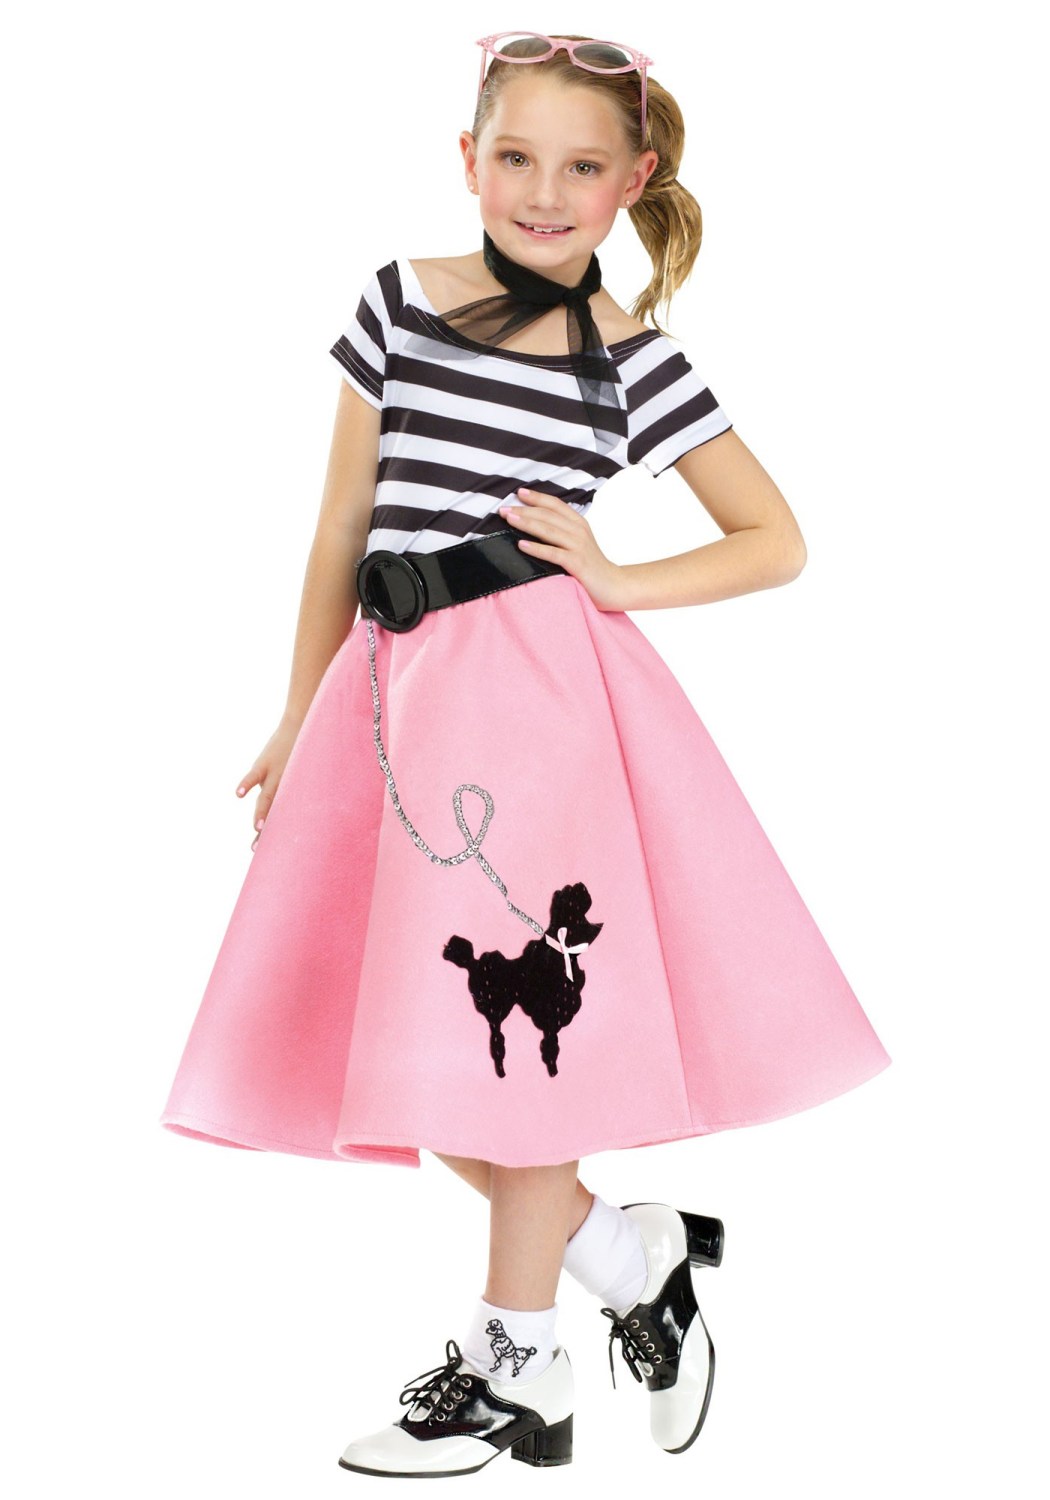 poodle skirt: the fun 50s fashion trend that won't die